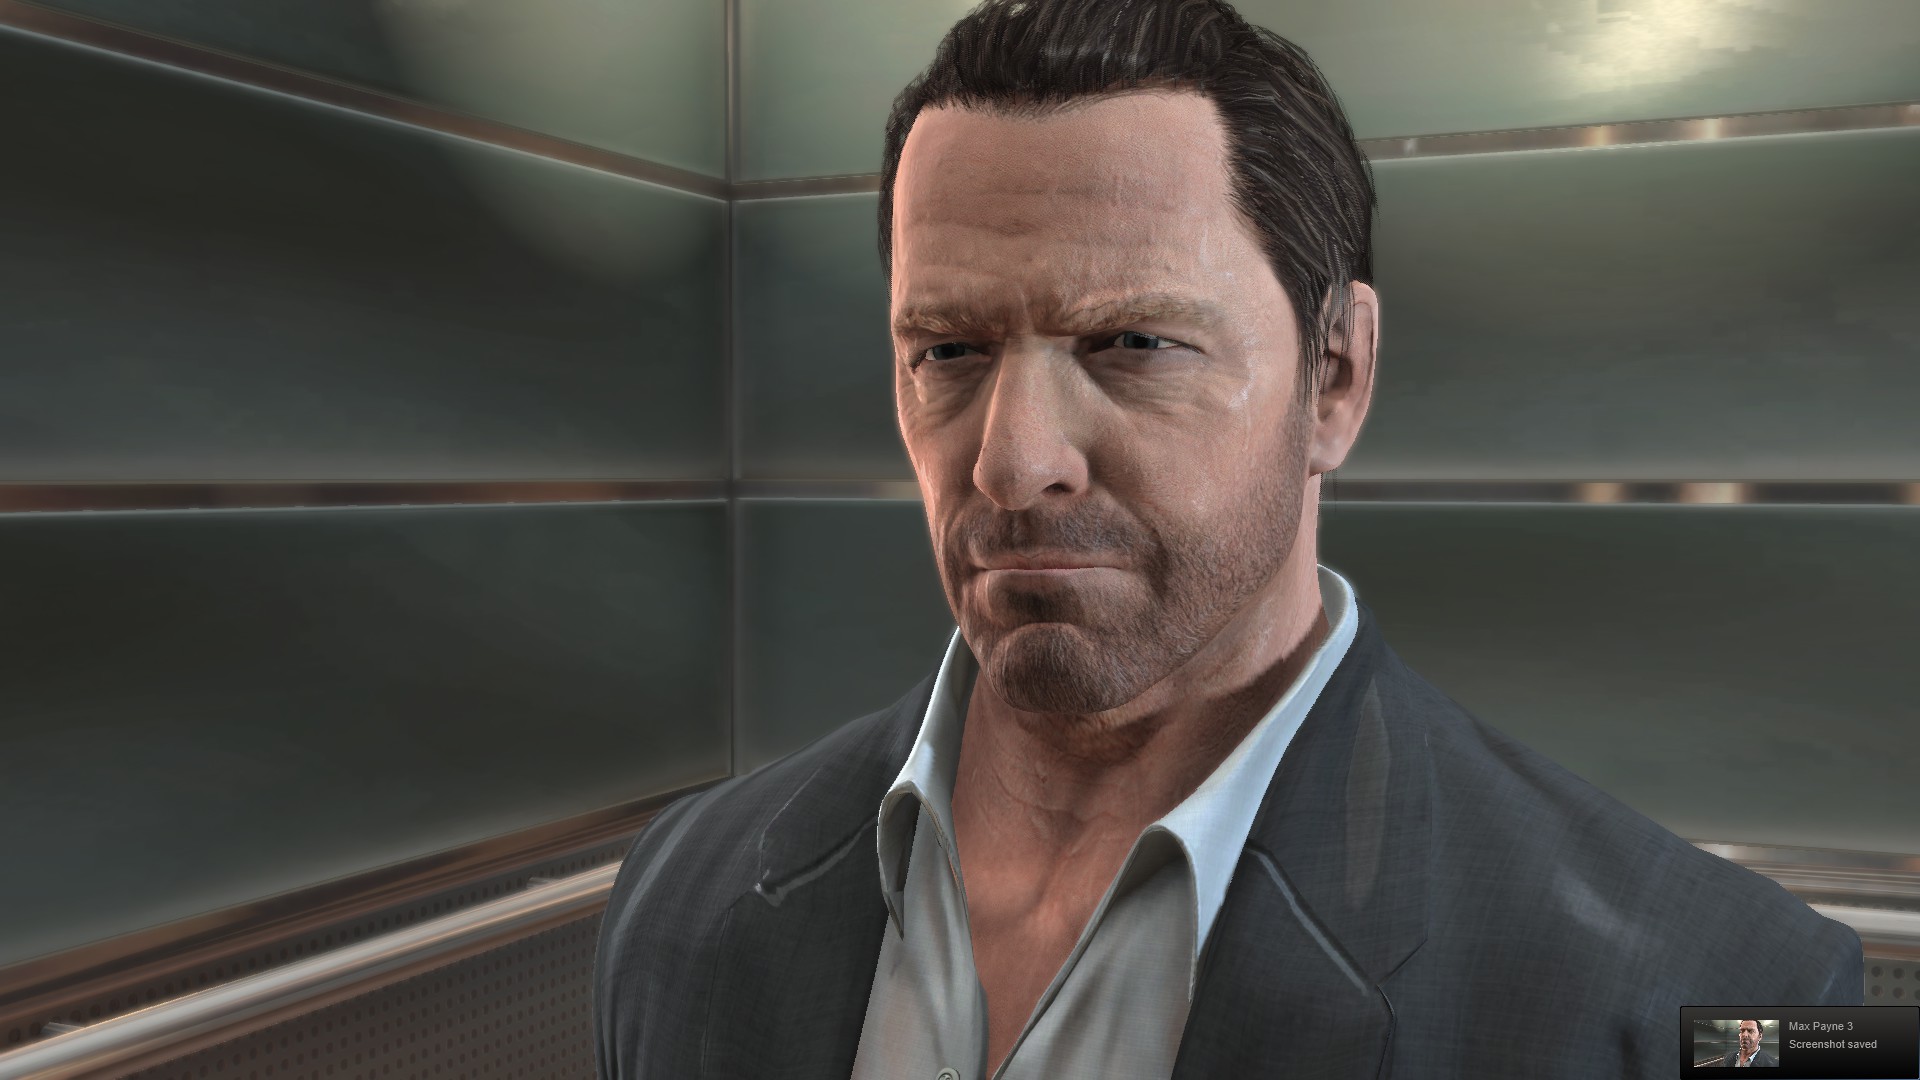 Max Payne 4 release date